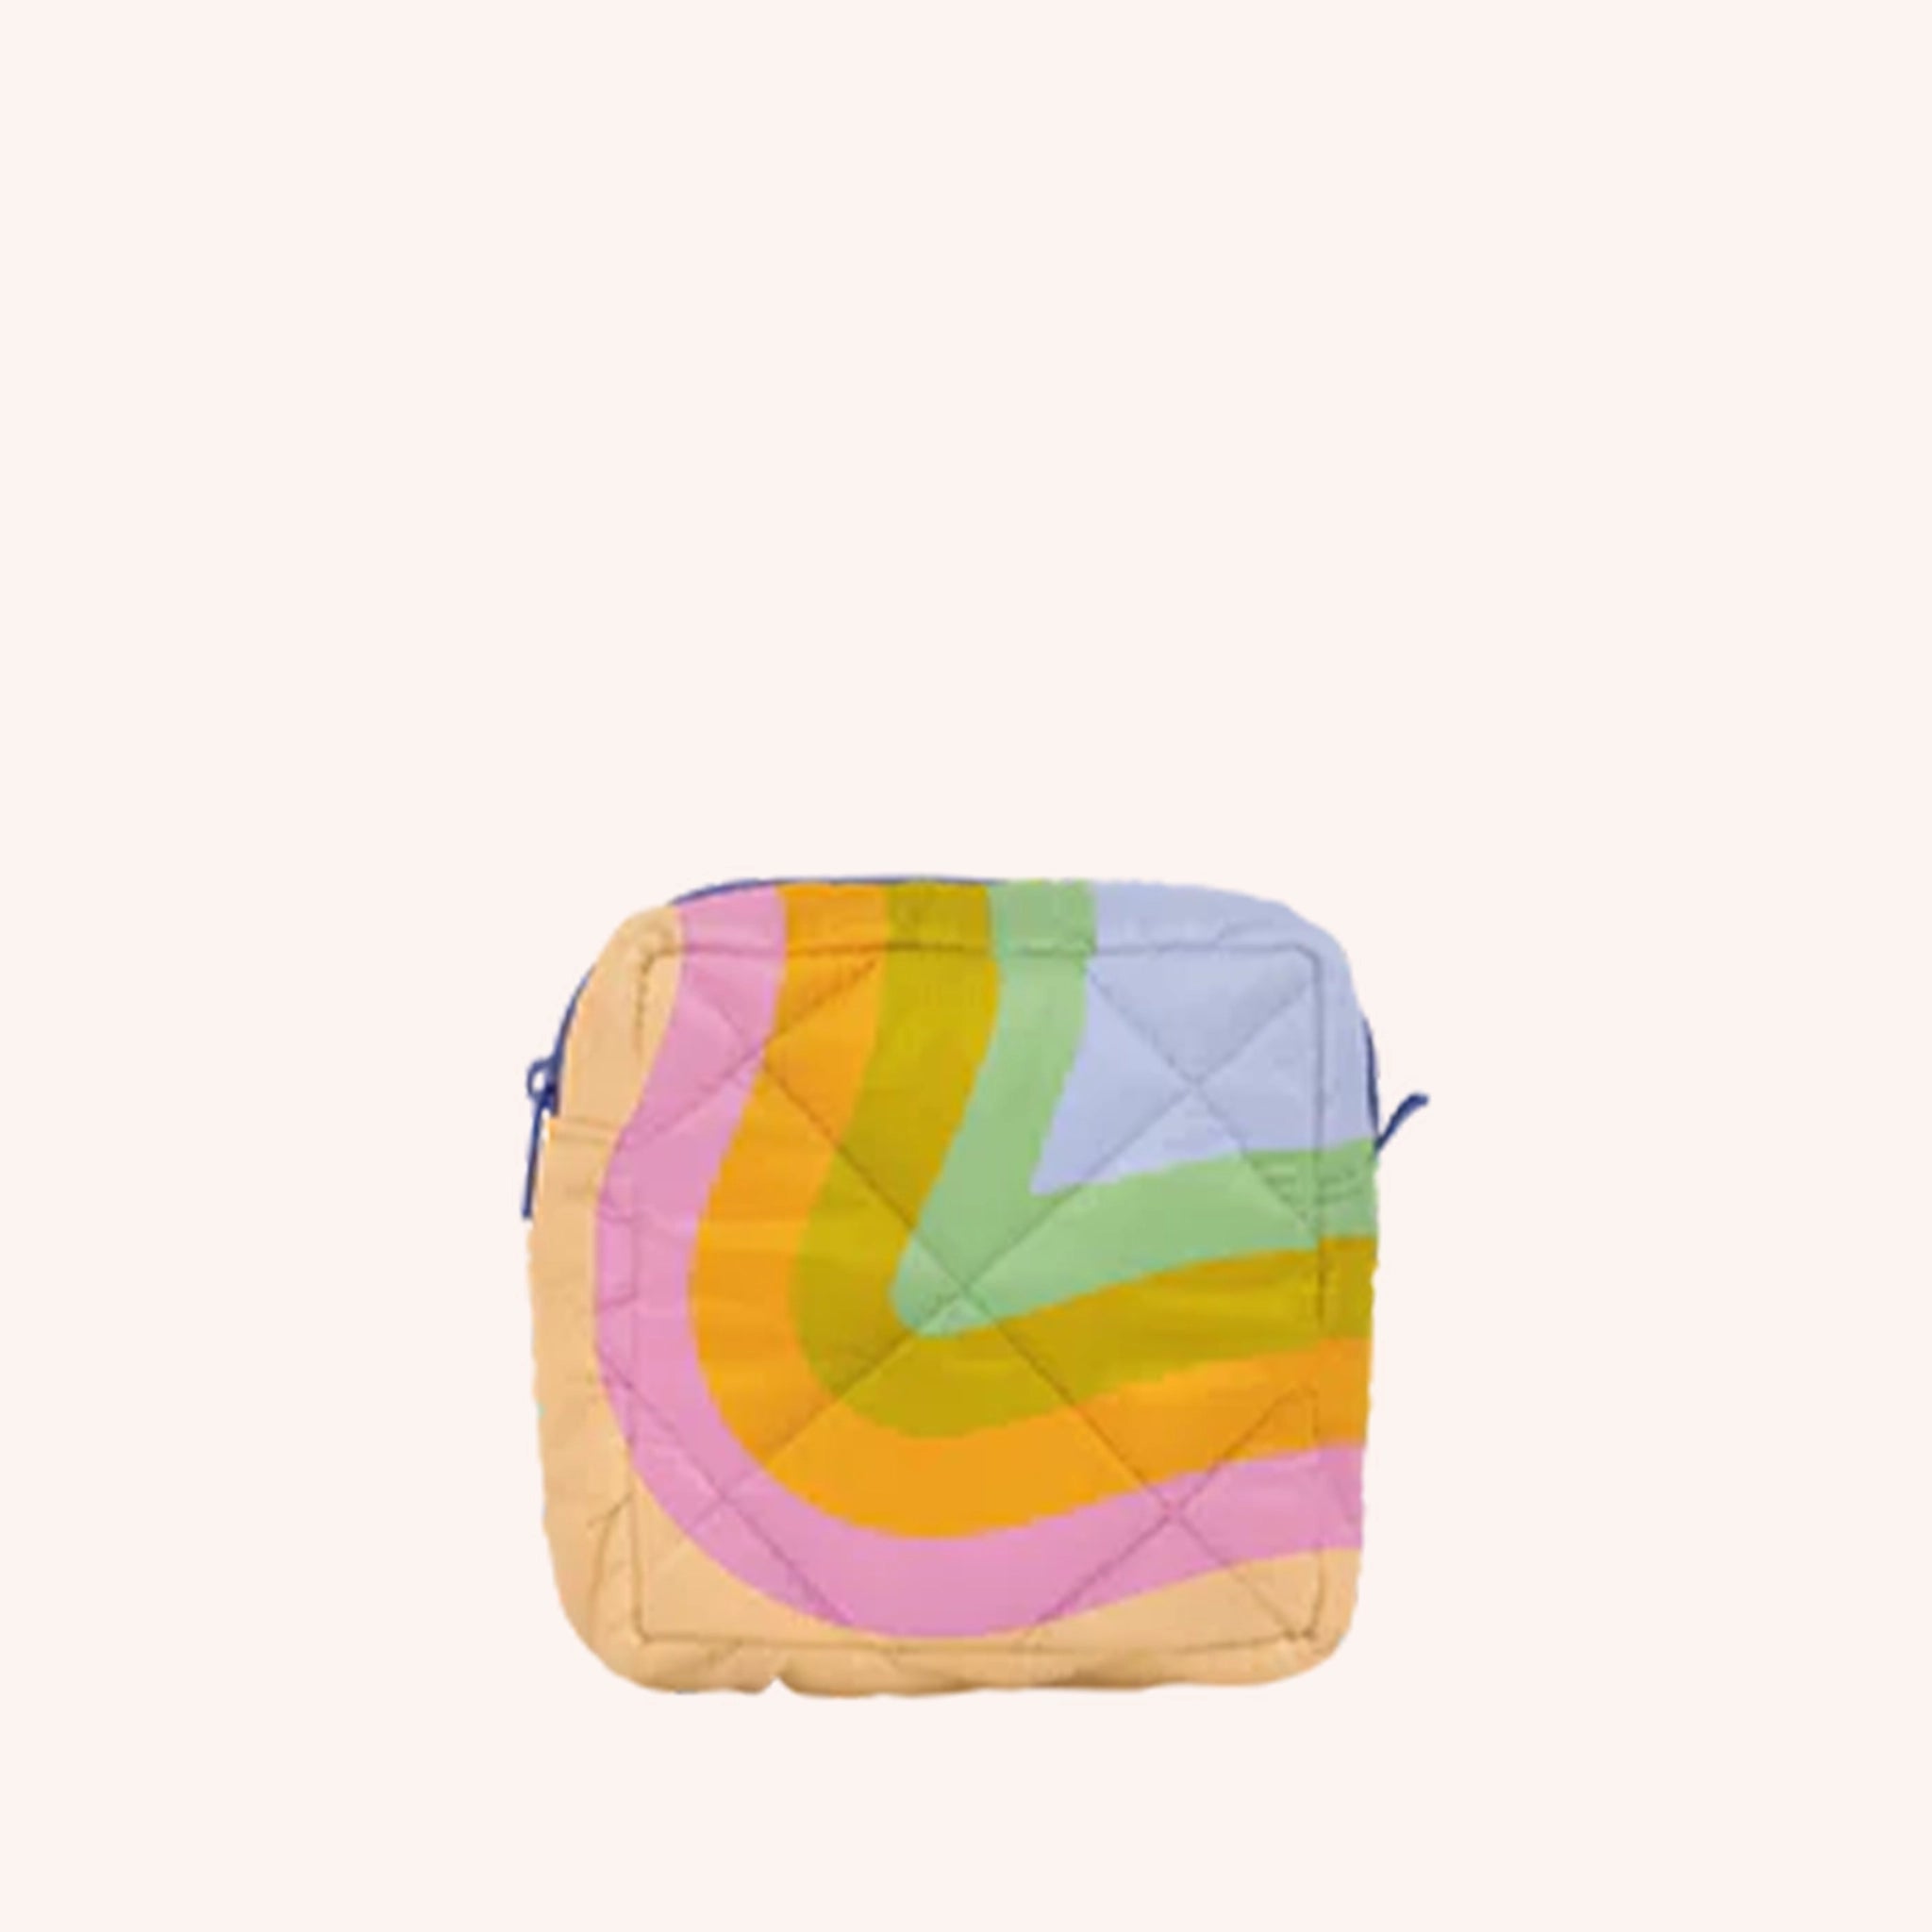 A small square pouch made with a puffy quilted material with a rainbow wavy design. It features a zipper closure.